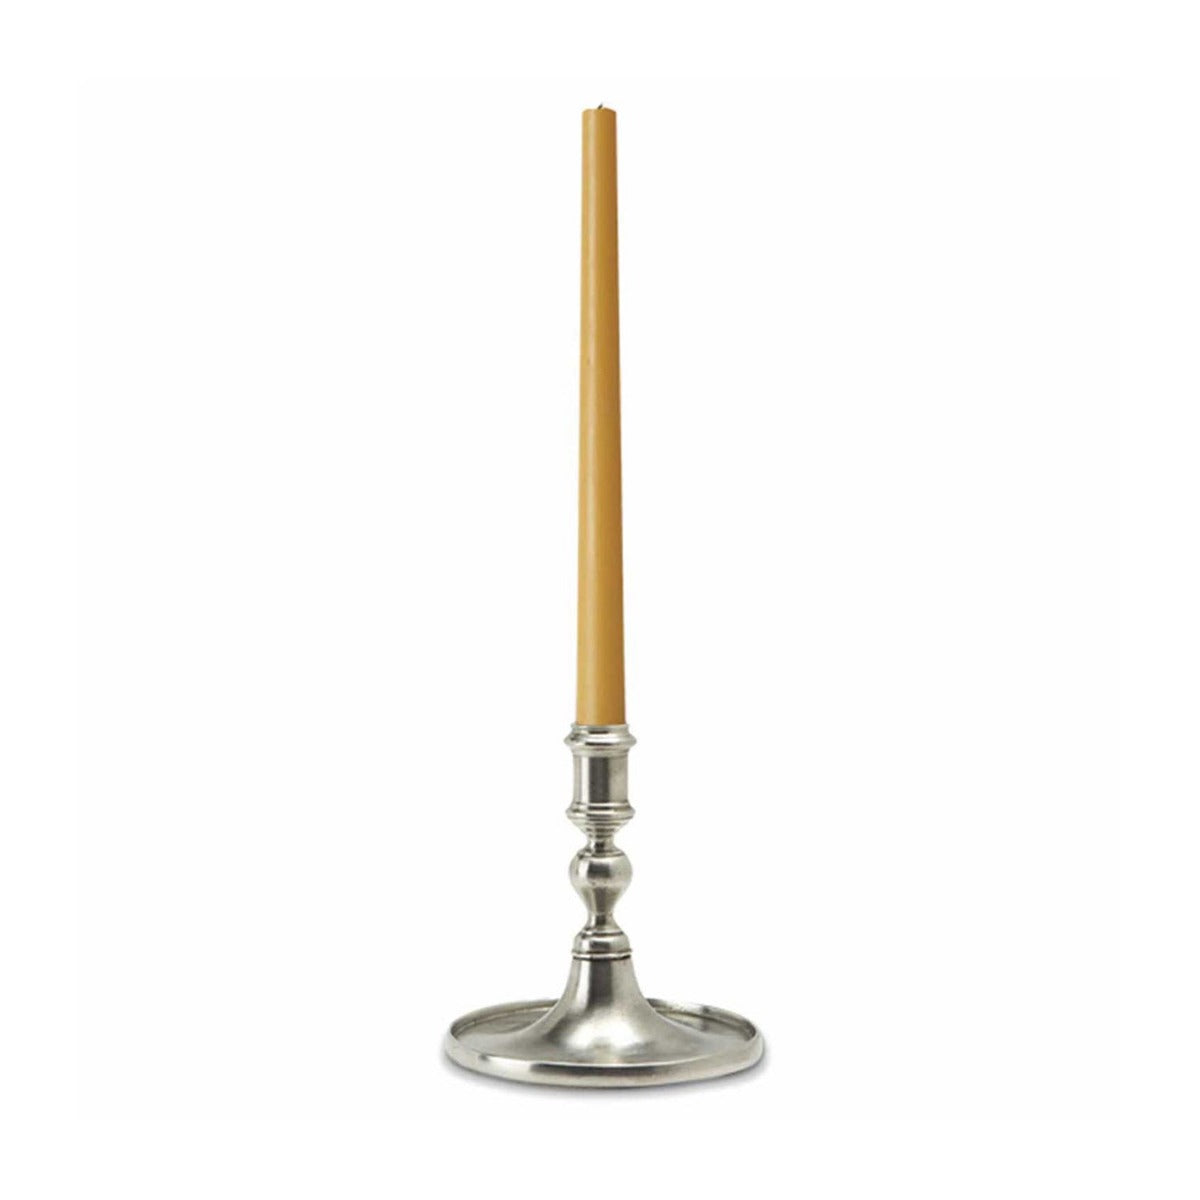 Match Pewter Round Based Candlestick